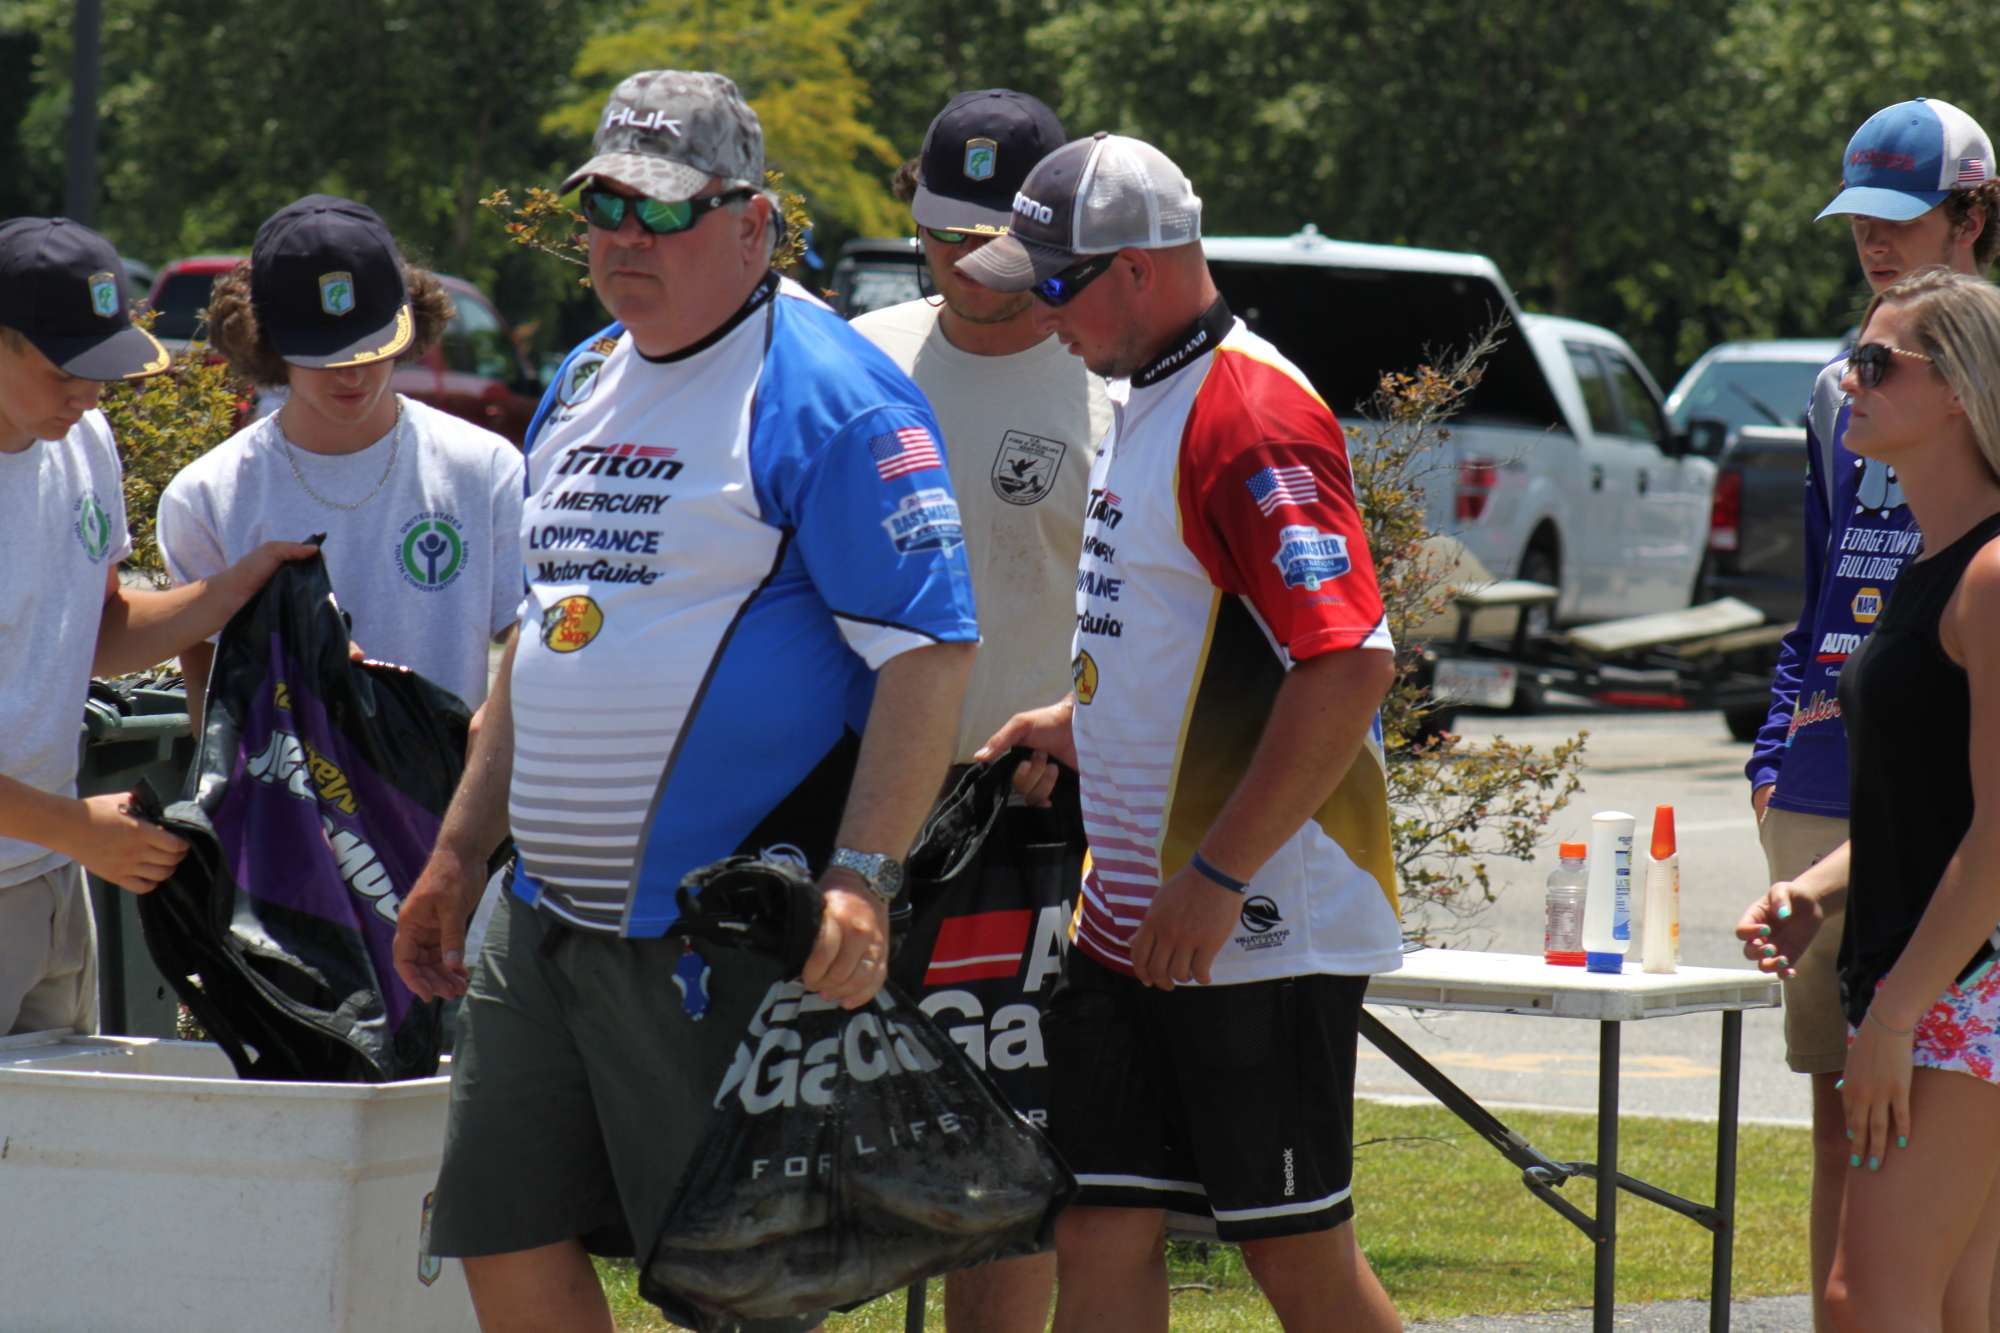 The heat has been blistering this week, even by South Carolina standards. The high temperature on both Wednesday and Thursday climbed to 99 degrees Fahrenheit. Still, the anglers went out their business in workmanlike fashion. 